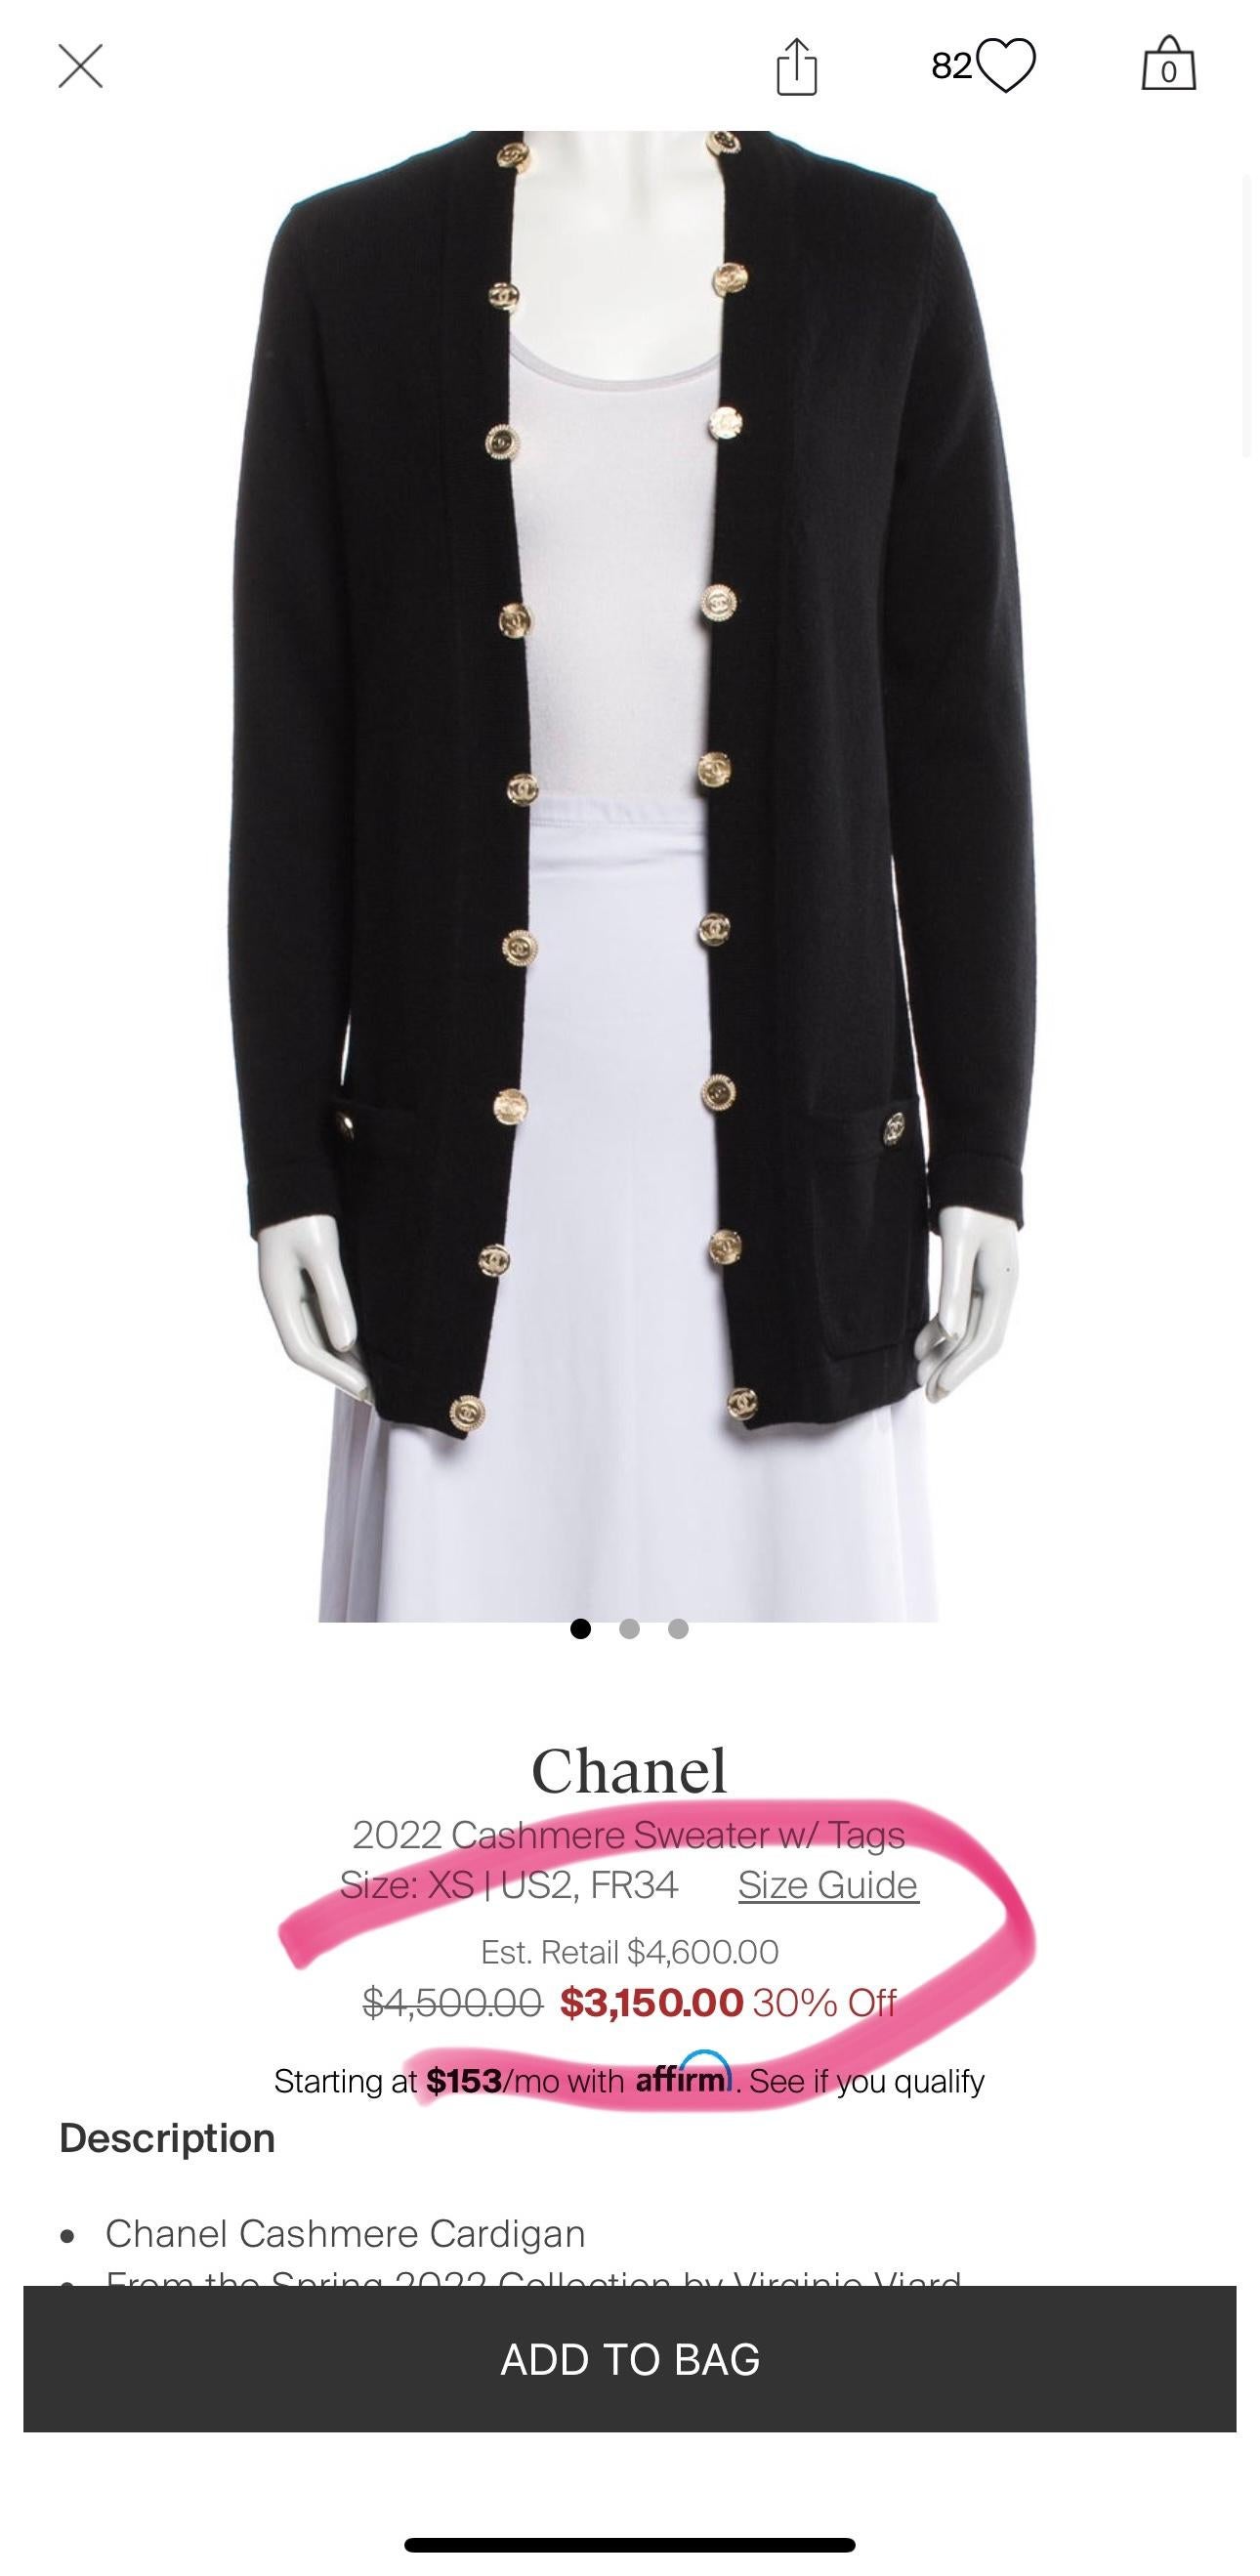 Stunning Chanel black cashmere cardigan with multiple CC logo buttons : from 2022 Spring Collection by Ms Virginie Viard.
Size mark 34 FR. Never worn.